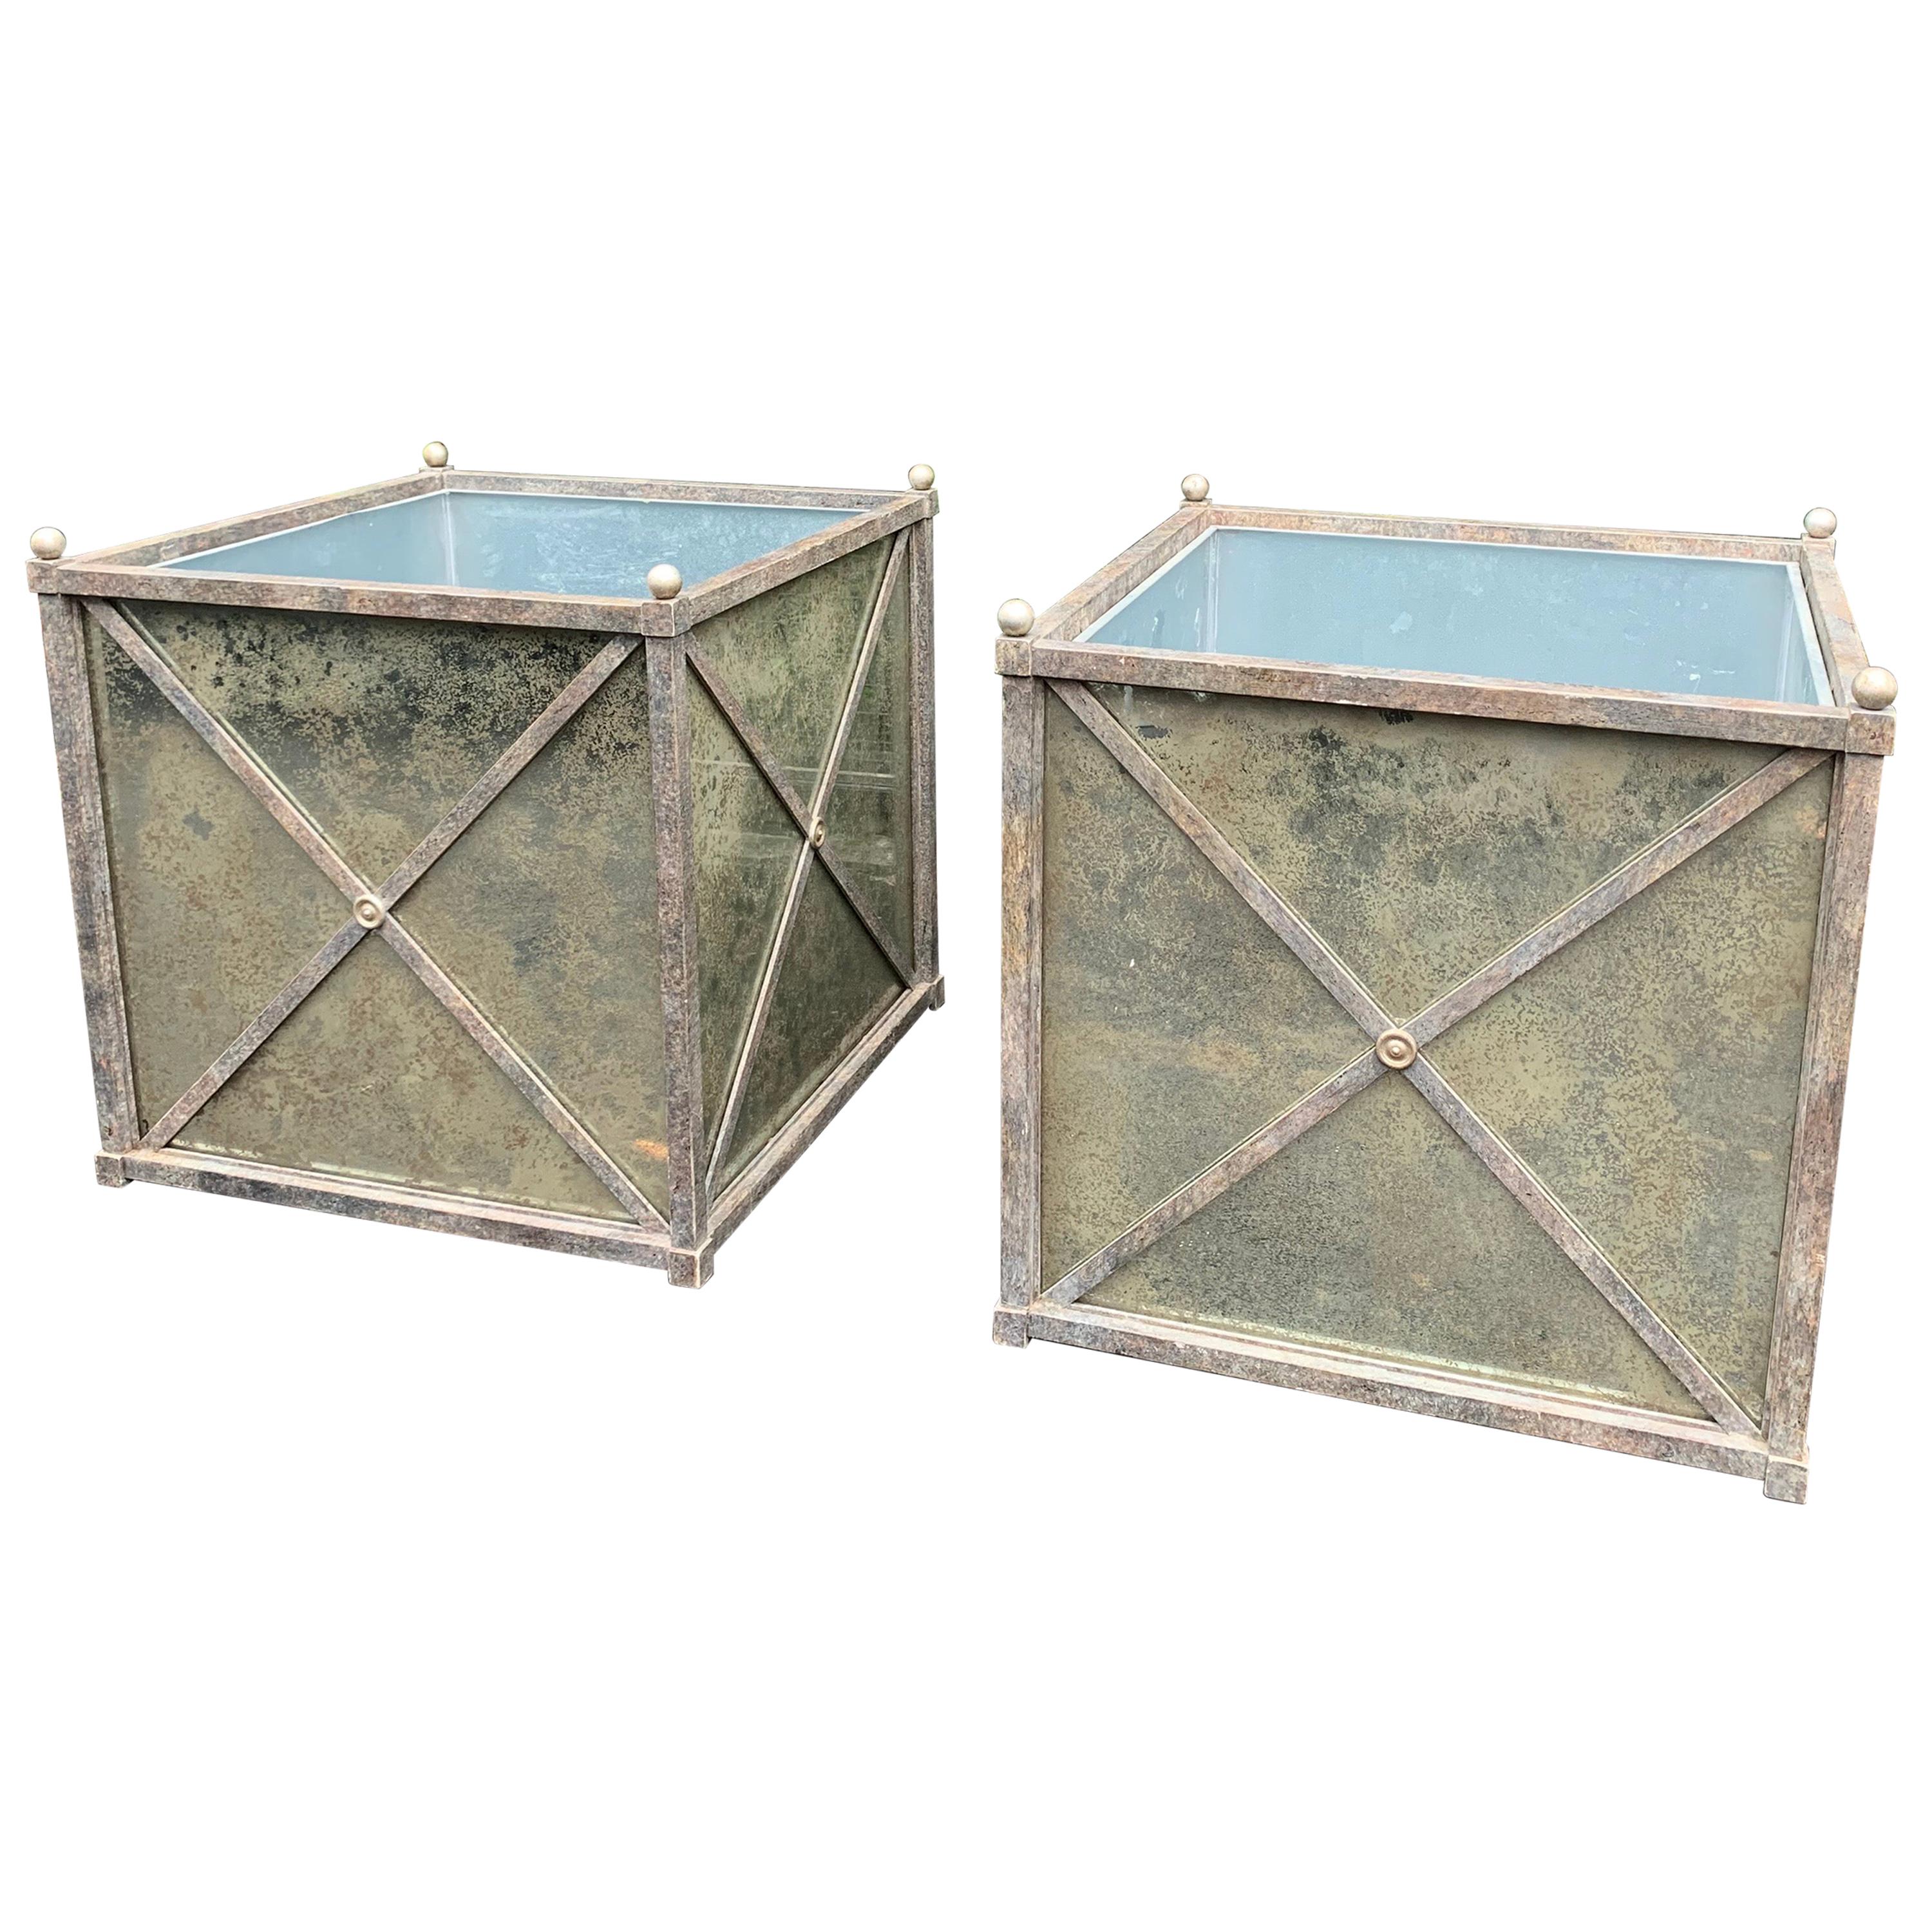 Large Pair of Hollywood Regency Style Iron and Mirror Square Planters